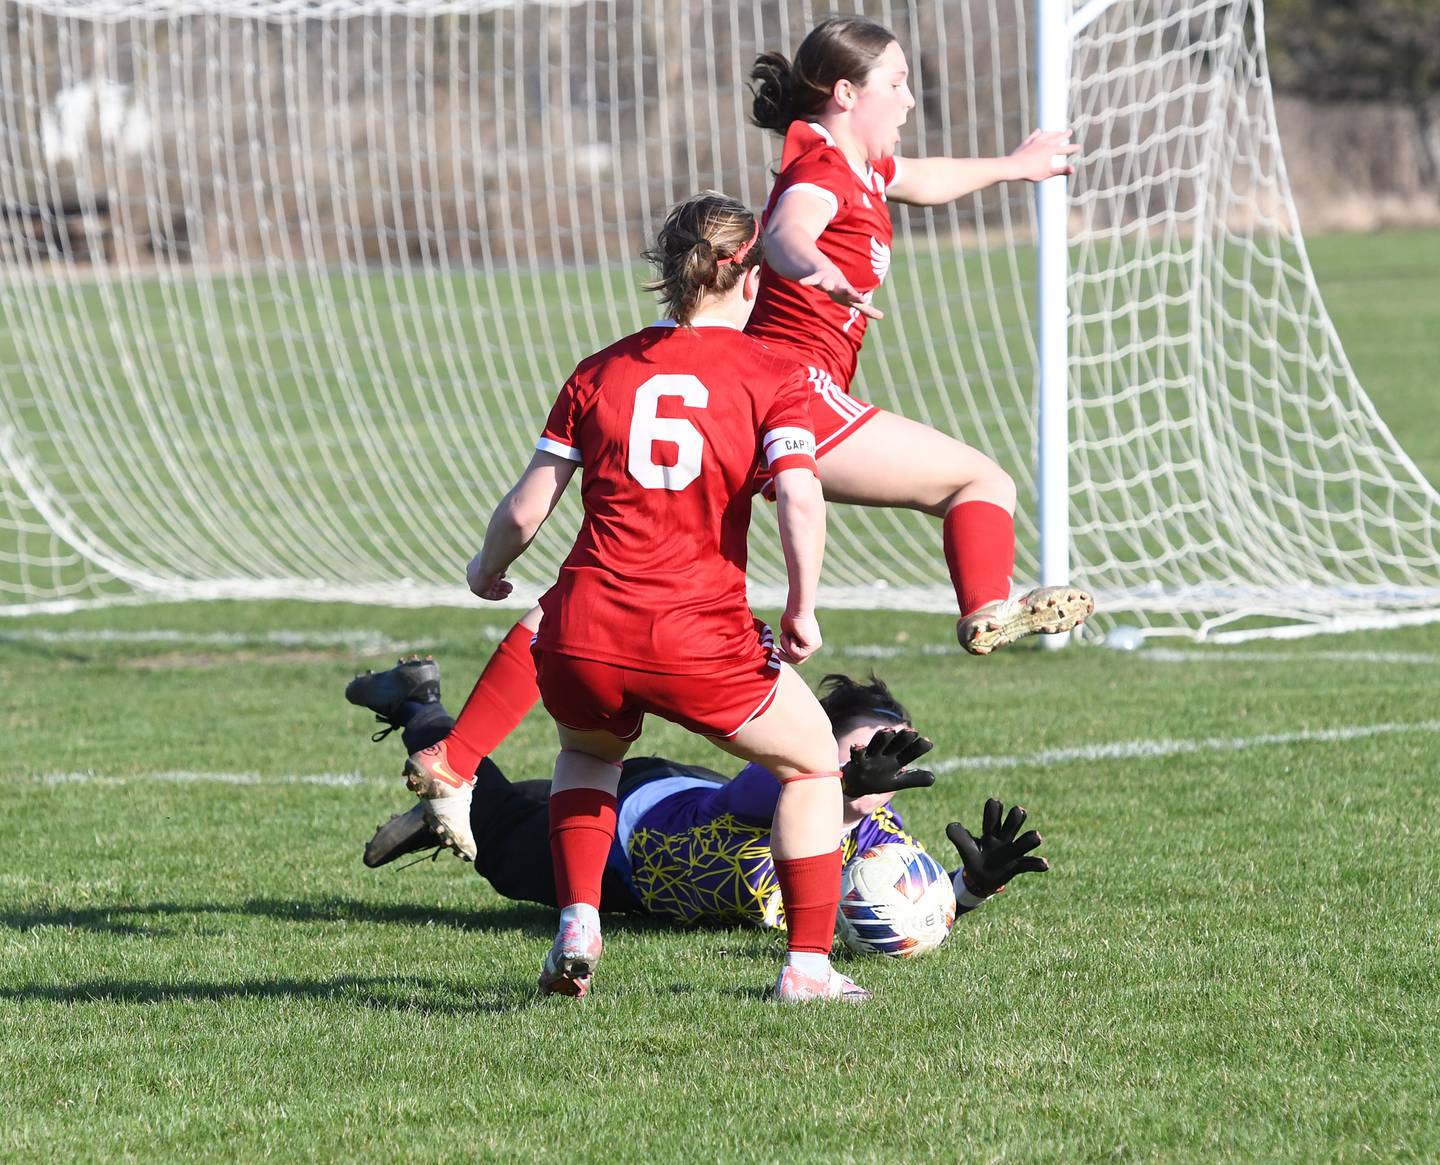 Hinckley Big Rock goalkeeper Danielle Rankin dives on the ball as two Oregon players Alyssa Mowry (6) and Anna Stender (2) move in on the play during a Monday, April 10 game at Oregon Park West.